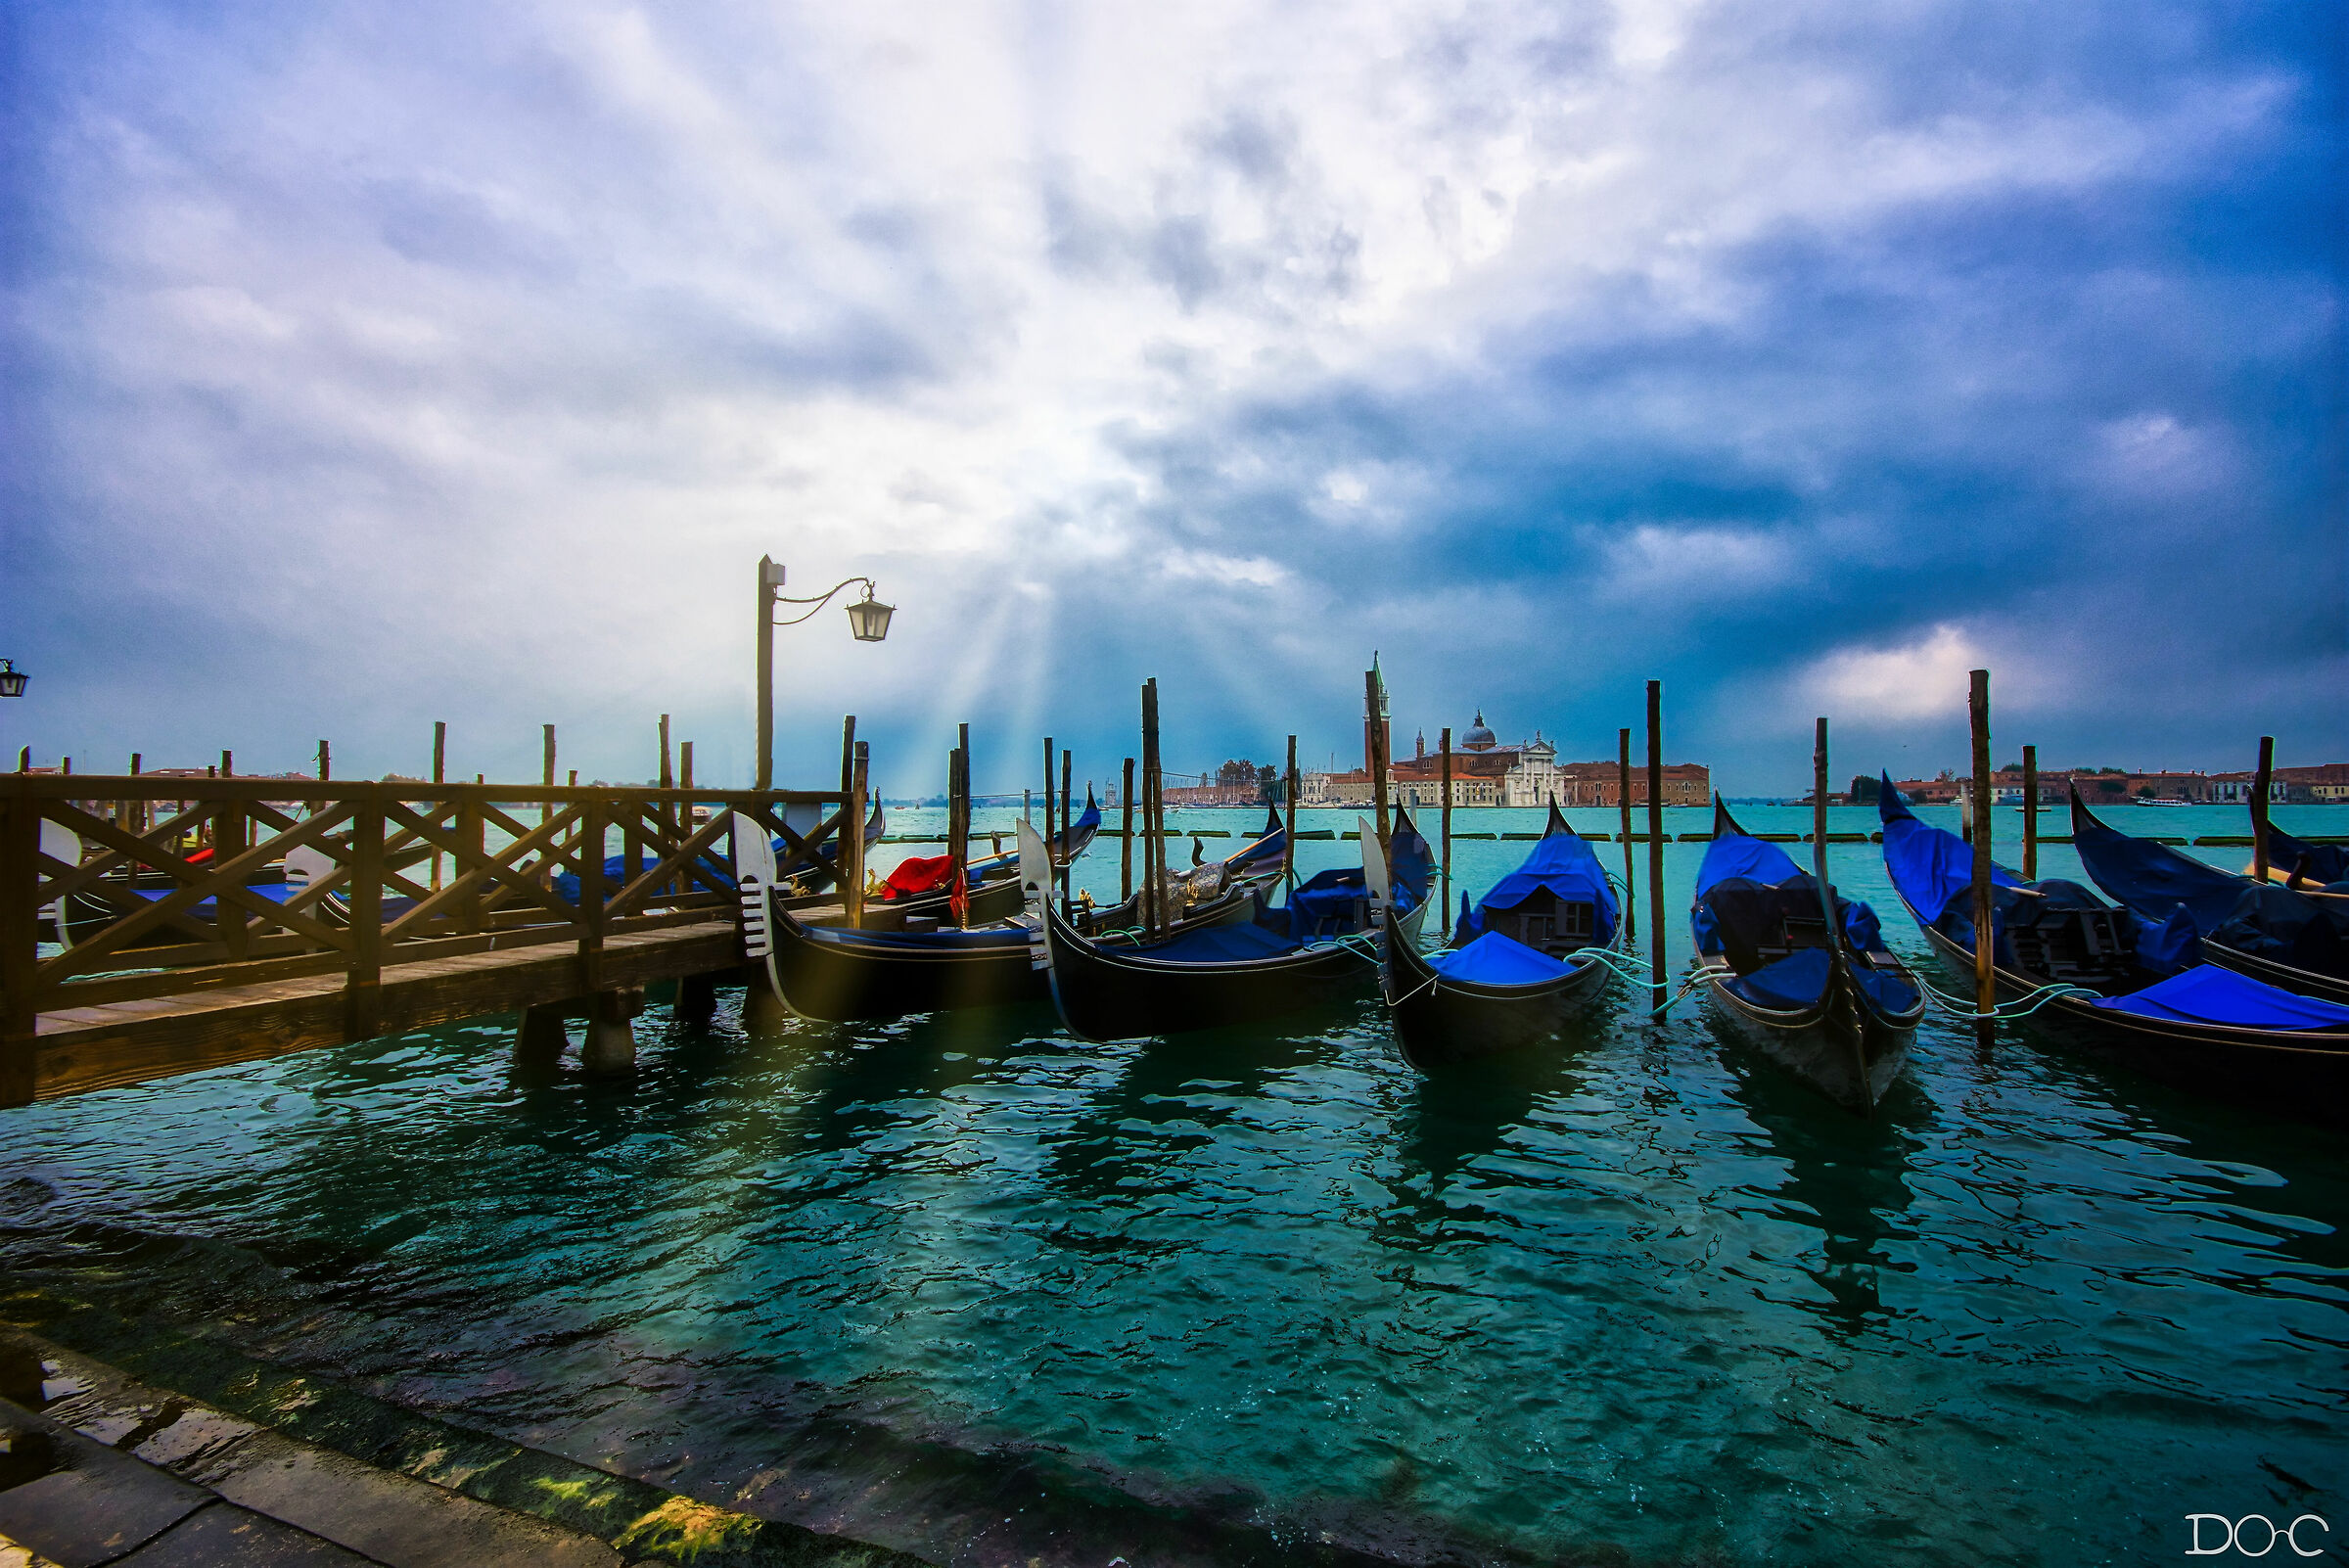 Venice at afternoon in a rainy morning....